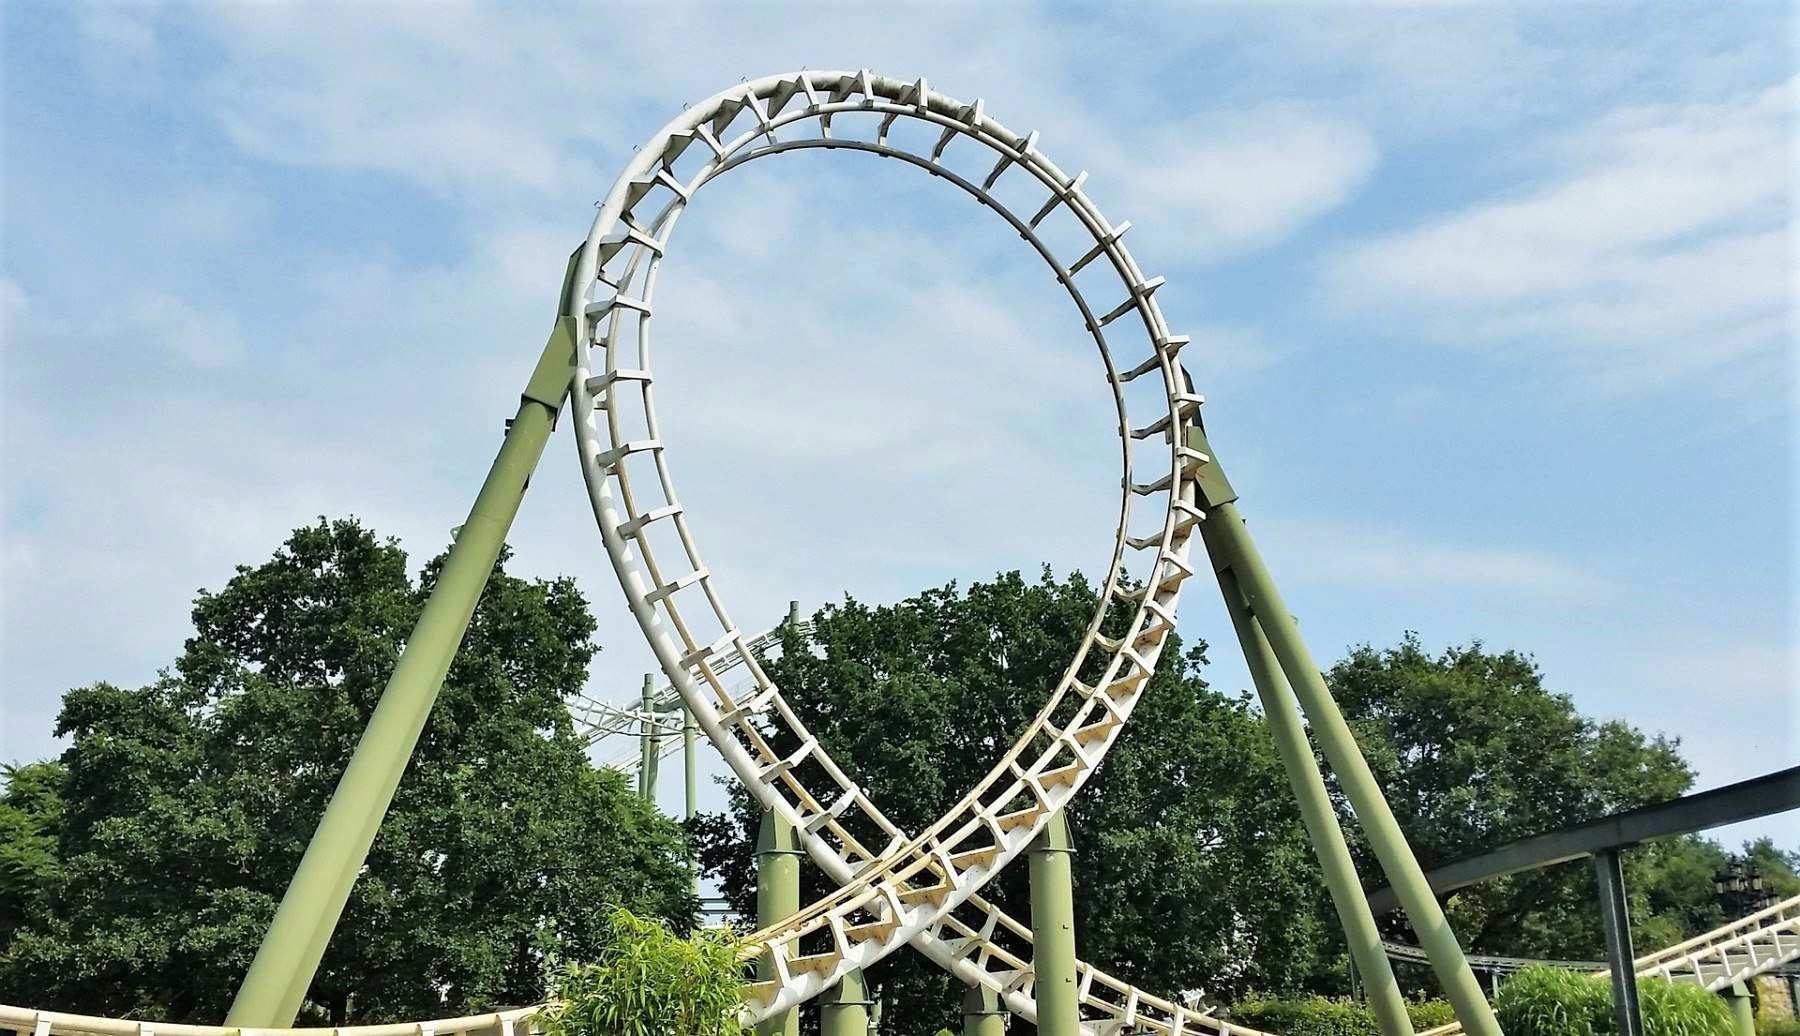 Amusement Park in Northern Germany